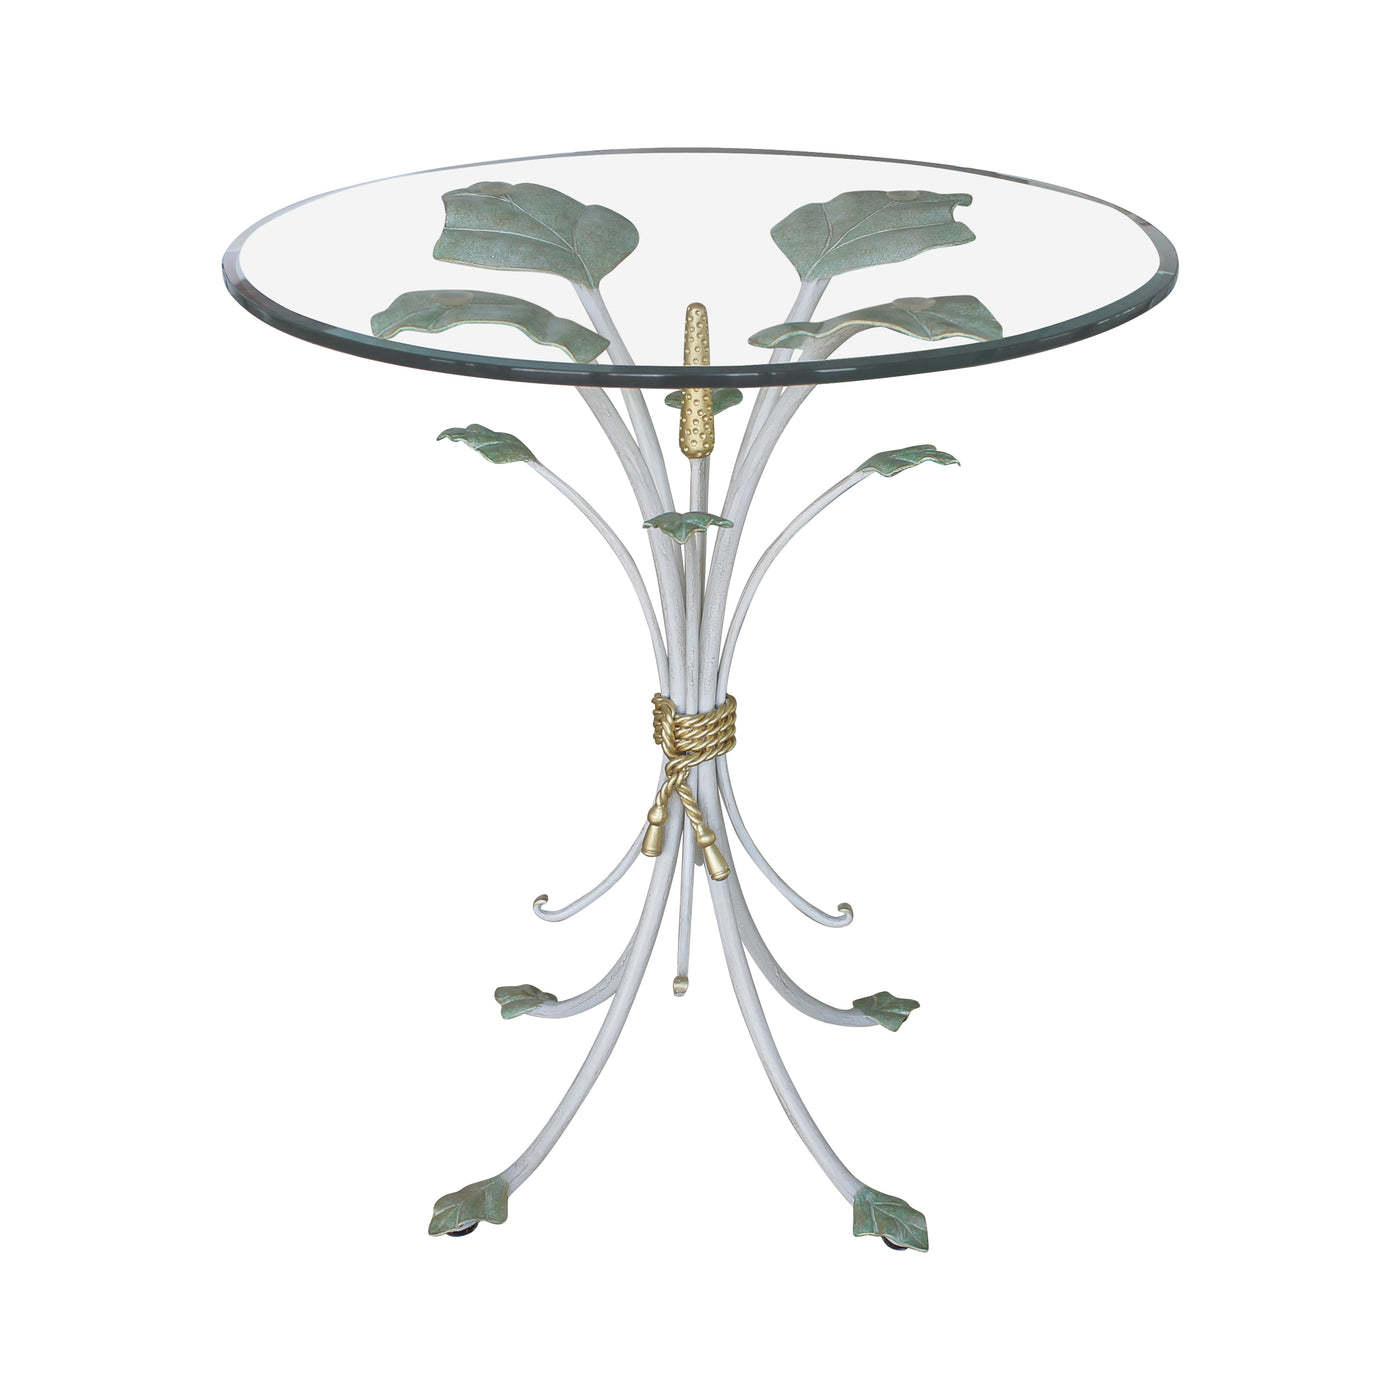 A novelty end table inspired by branches and leaves with a transparent glass top